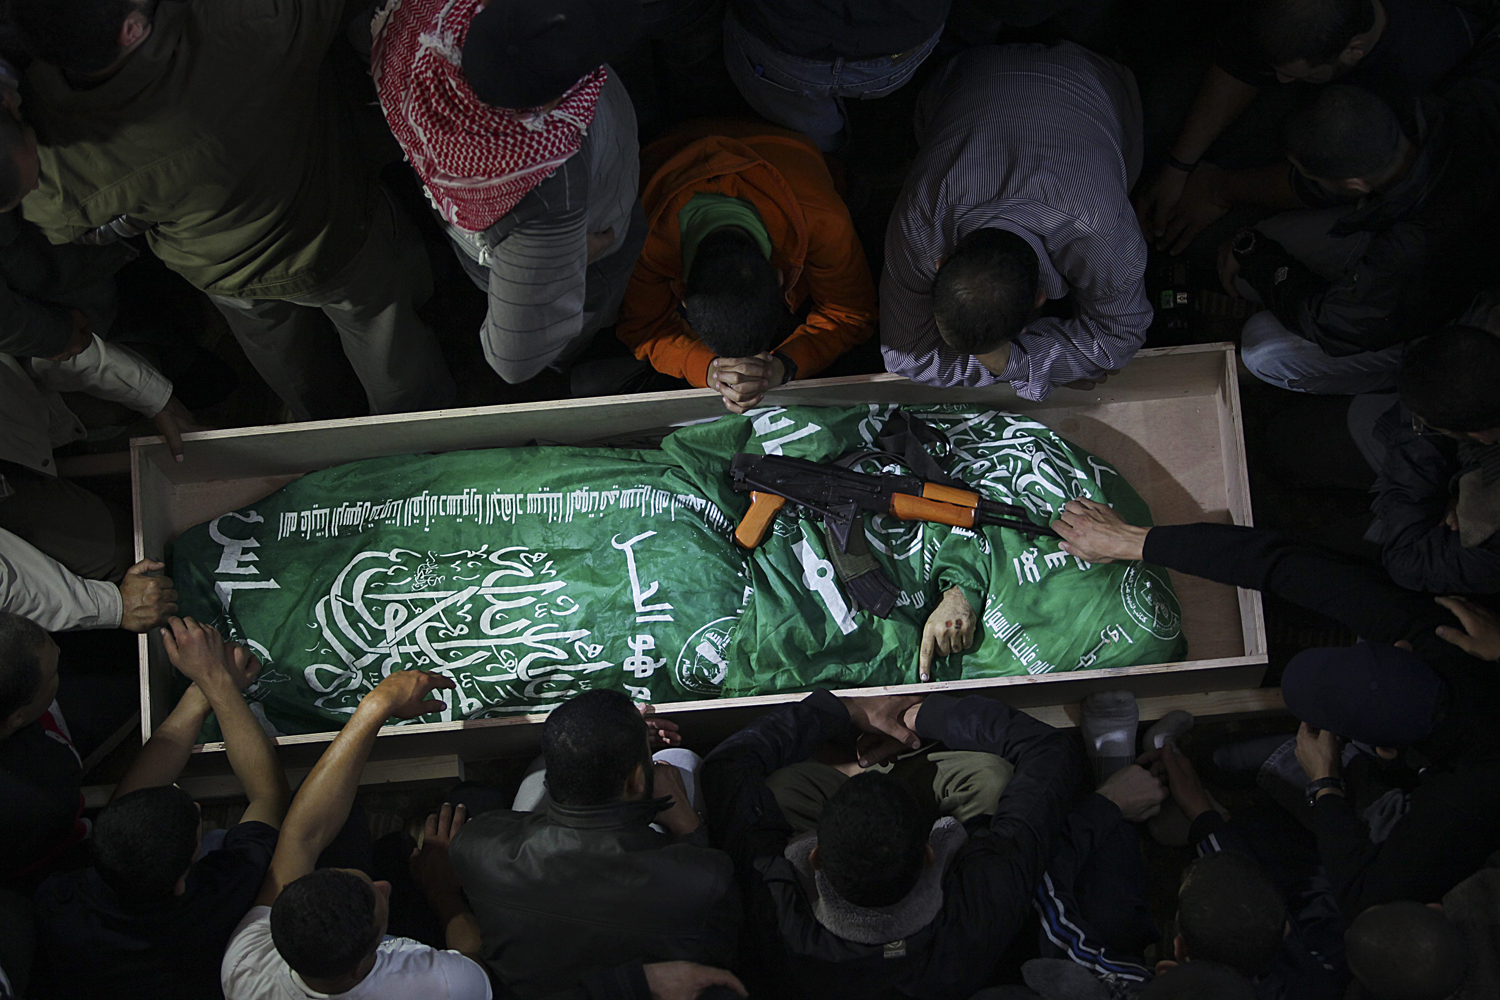 Image: Nov. 15, 2012. Palestinians mourn next to the body of Hamas militant Mohammed al-Hams during his funeral in Gaza City.